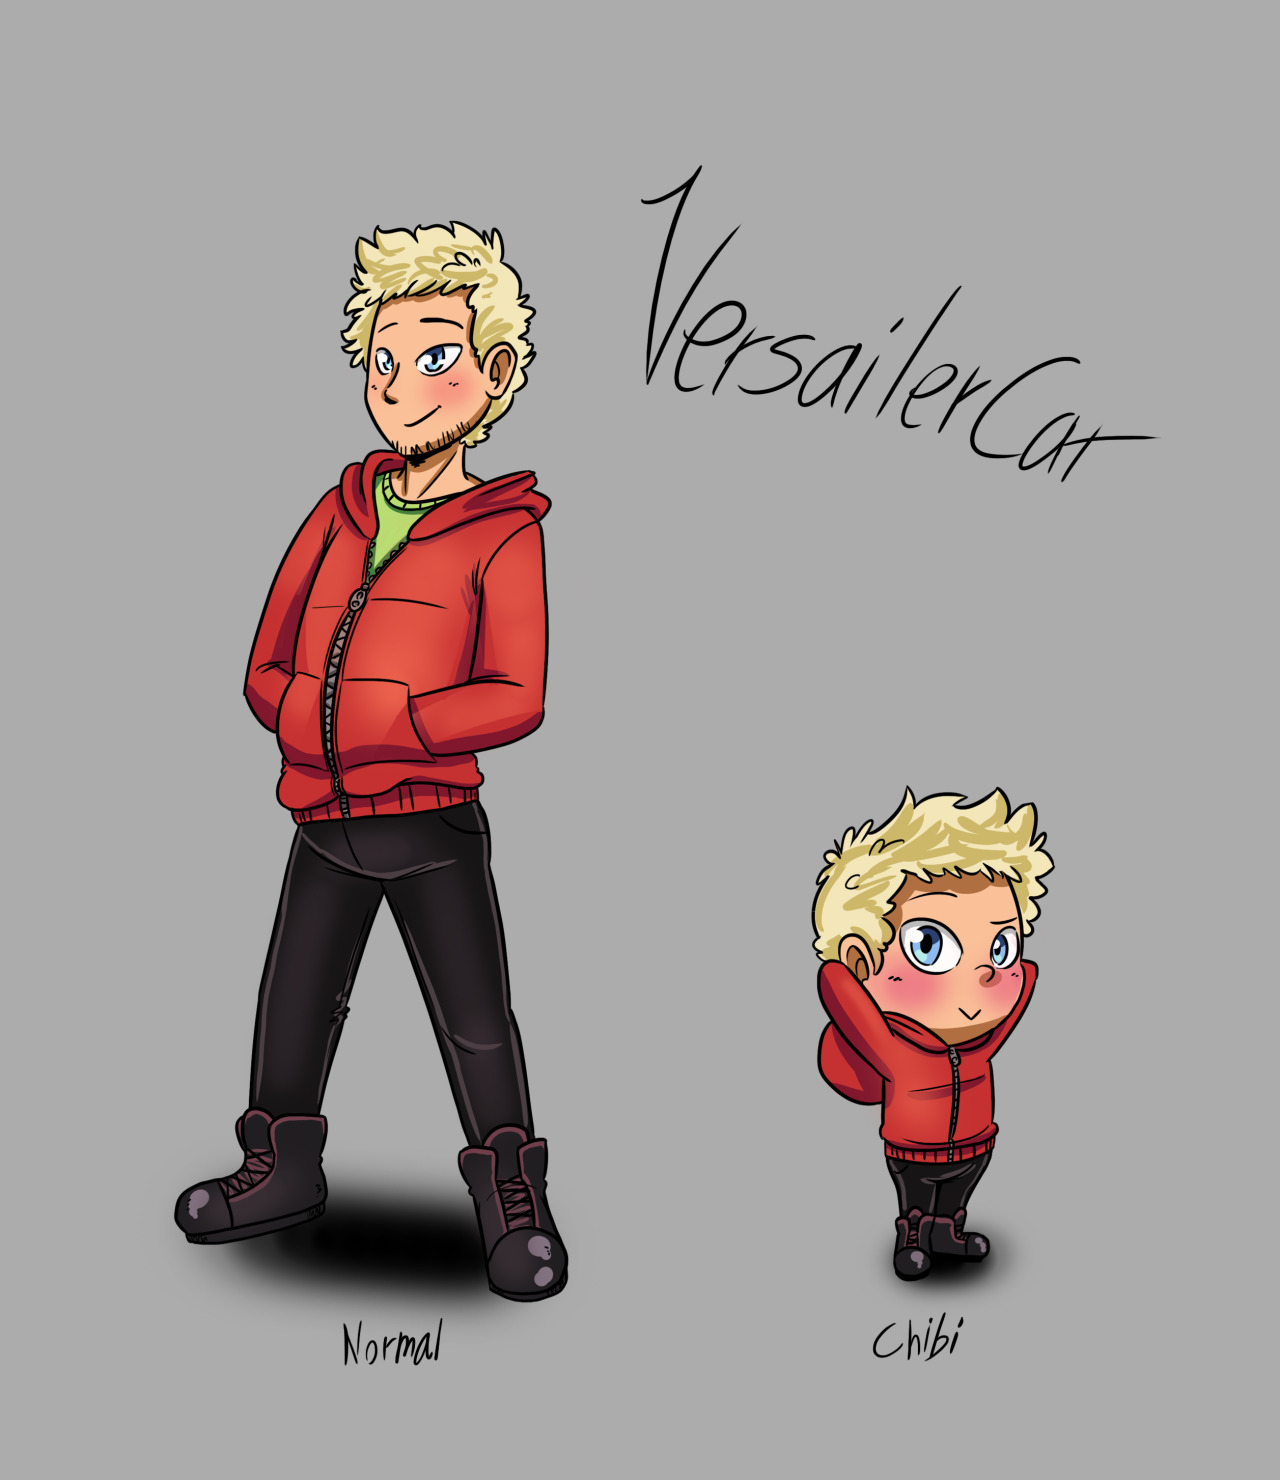 It´s me, but colorful and with a tiny-me next to it. #self portrayal#self#one#anime style#chibi#blonde boi#red hoodie#versailercat #BZC detective Agency #BZCDA#BZC